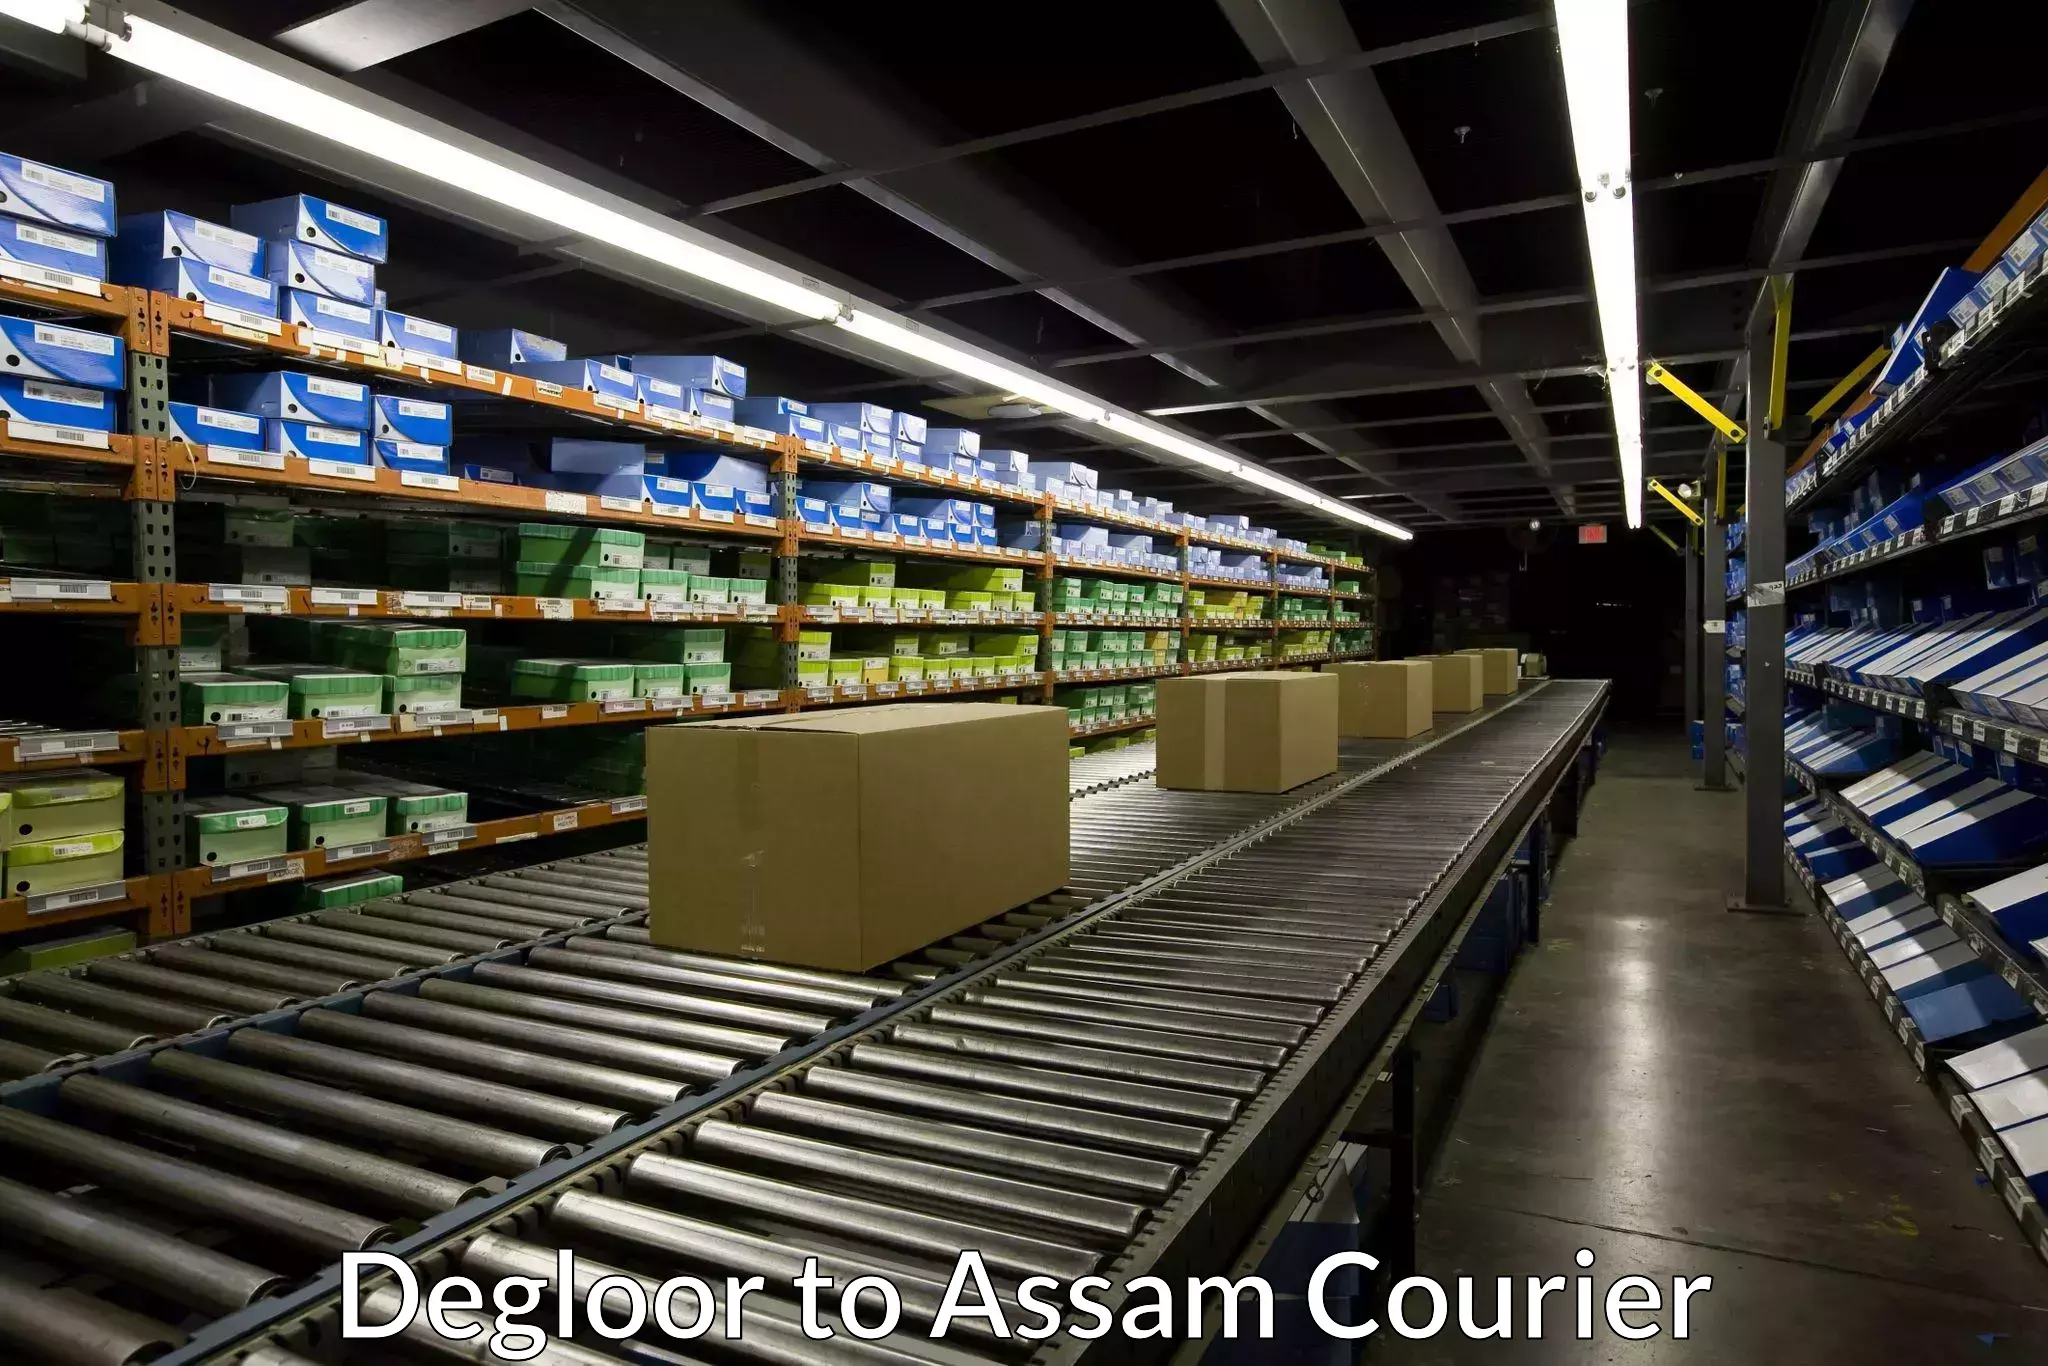 Advanced shipping logistics in Degloor to Assam